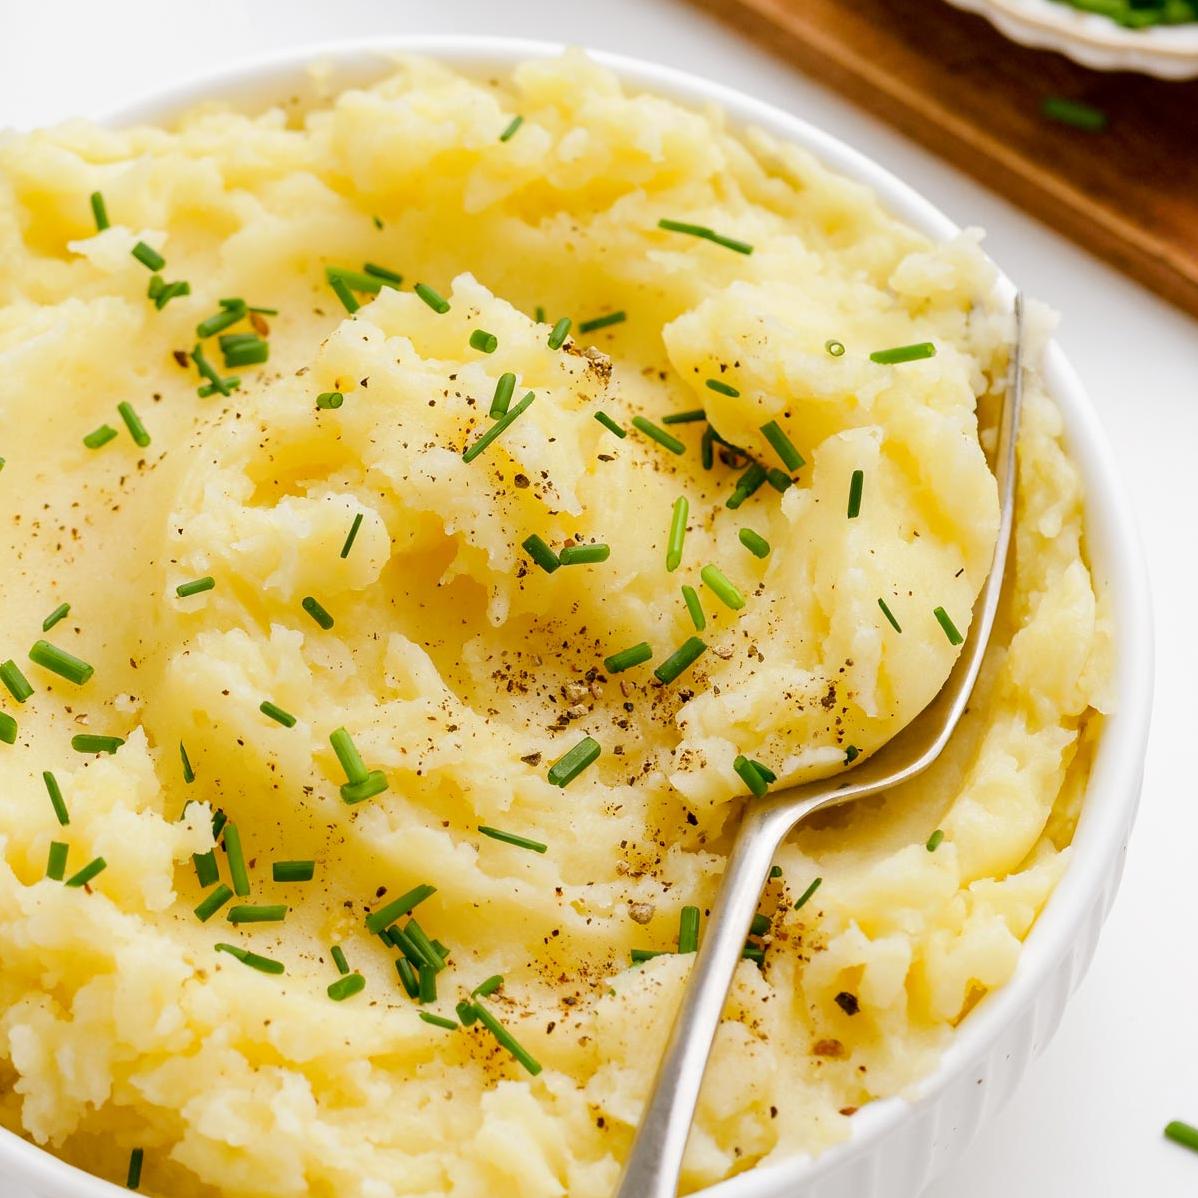  Creamy and dreamy mashed potatoes without the dairy